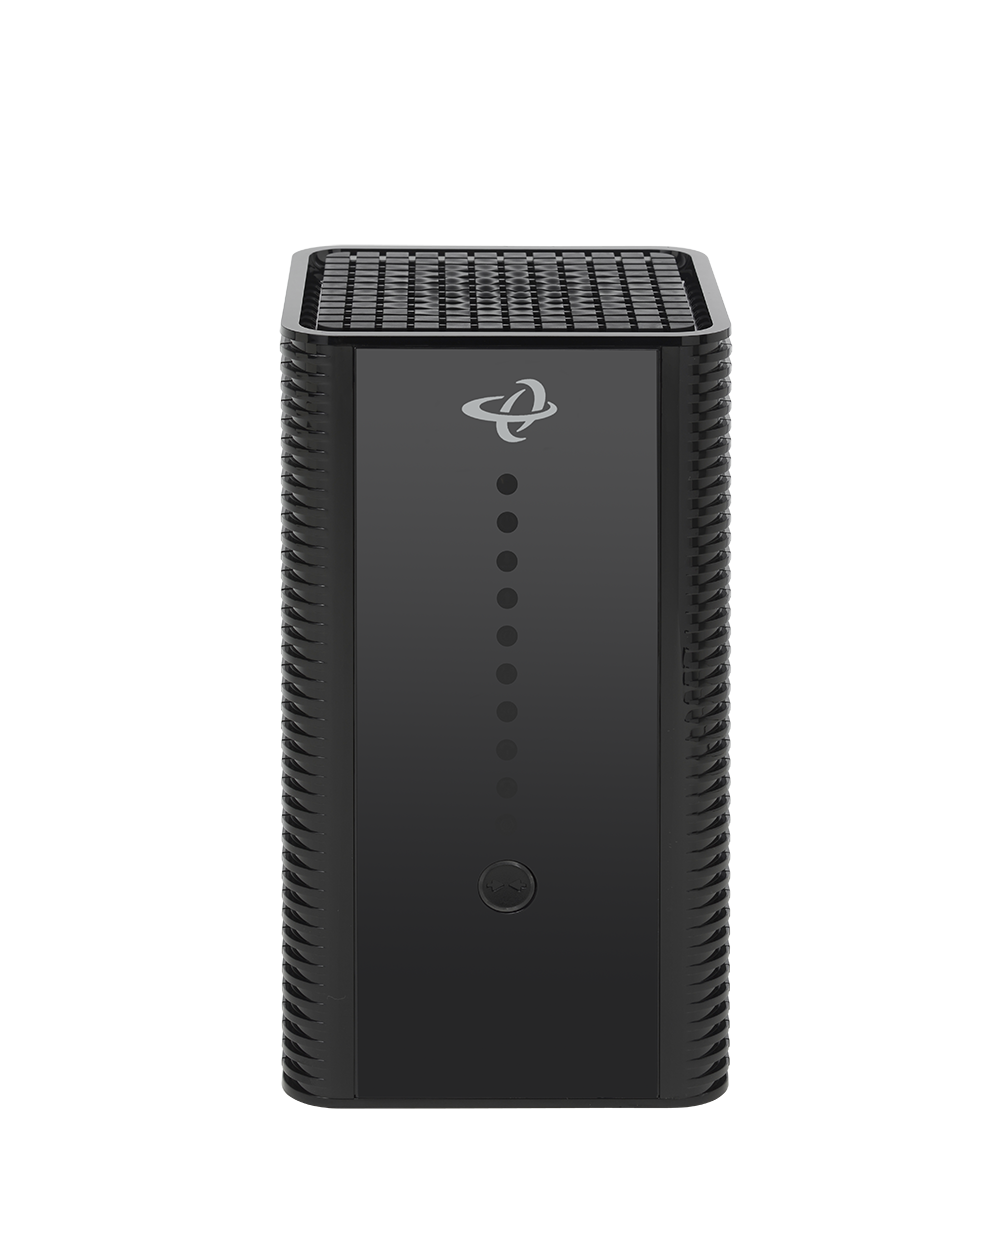 DOCSIS 3.1 Cable Modem Router from Hitron - CODA-4582